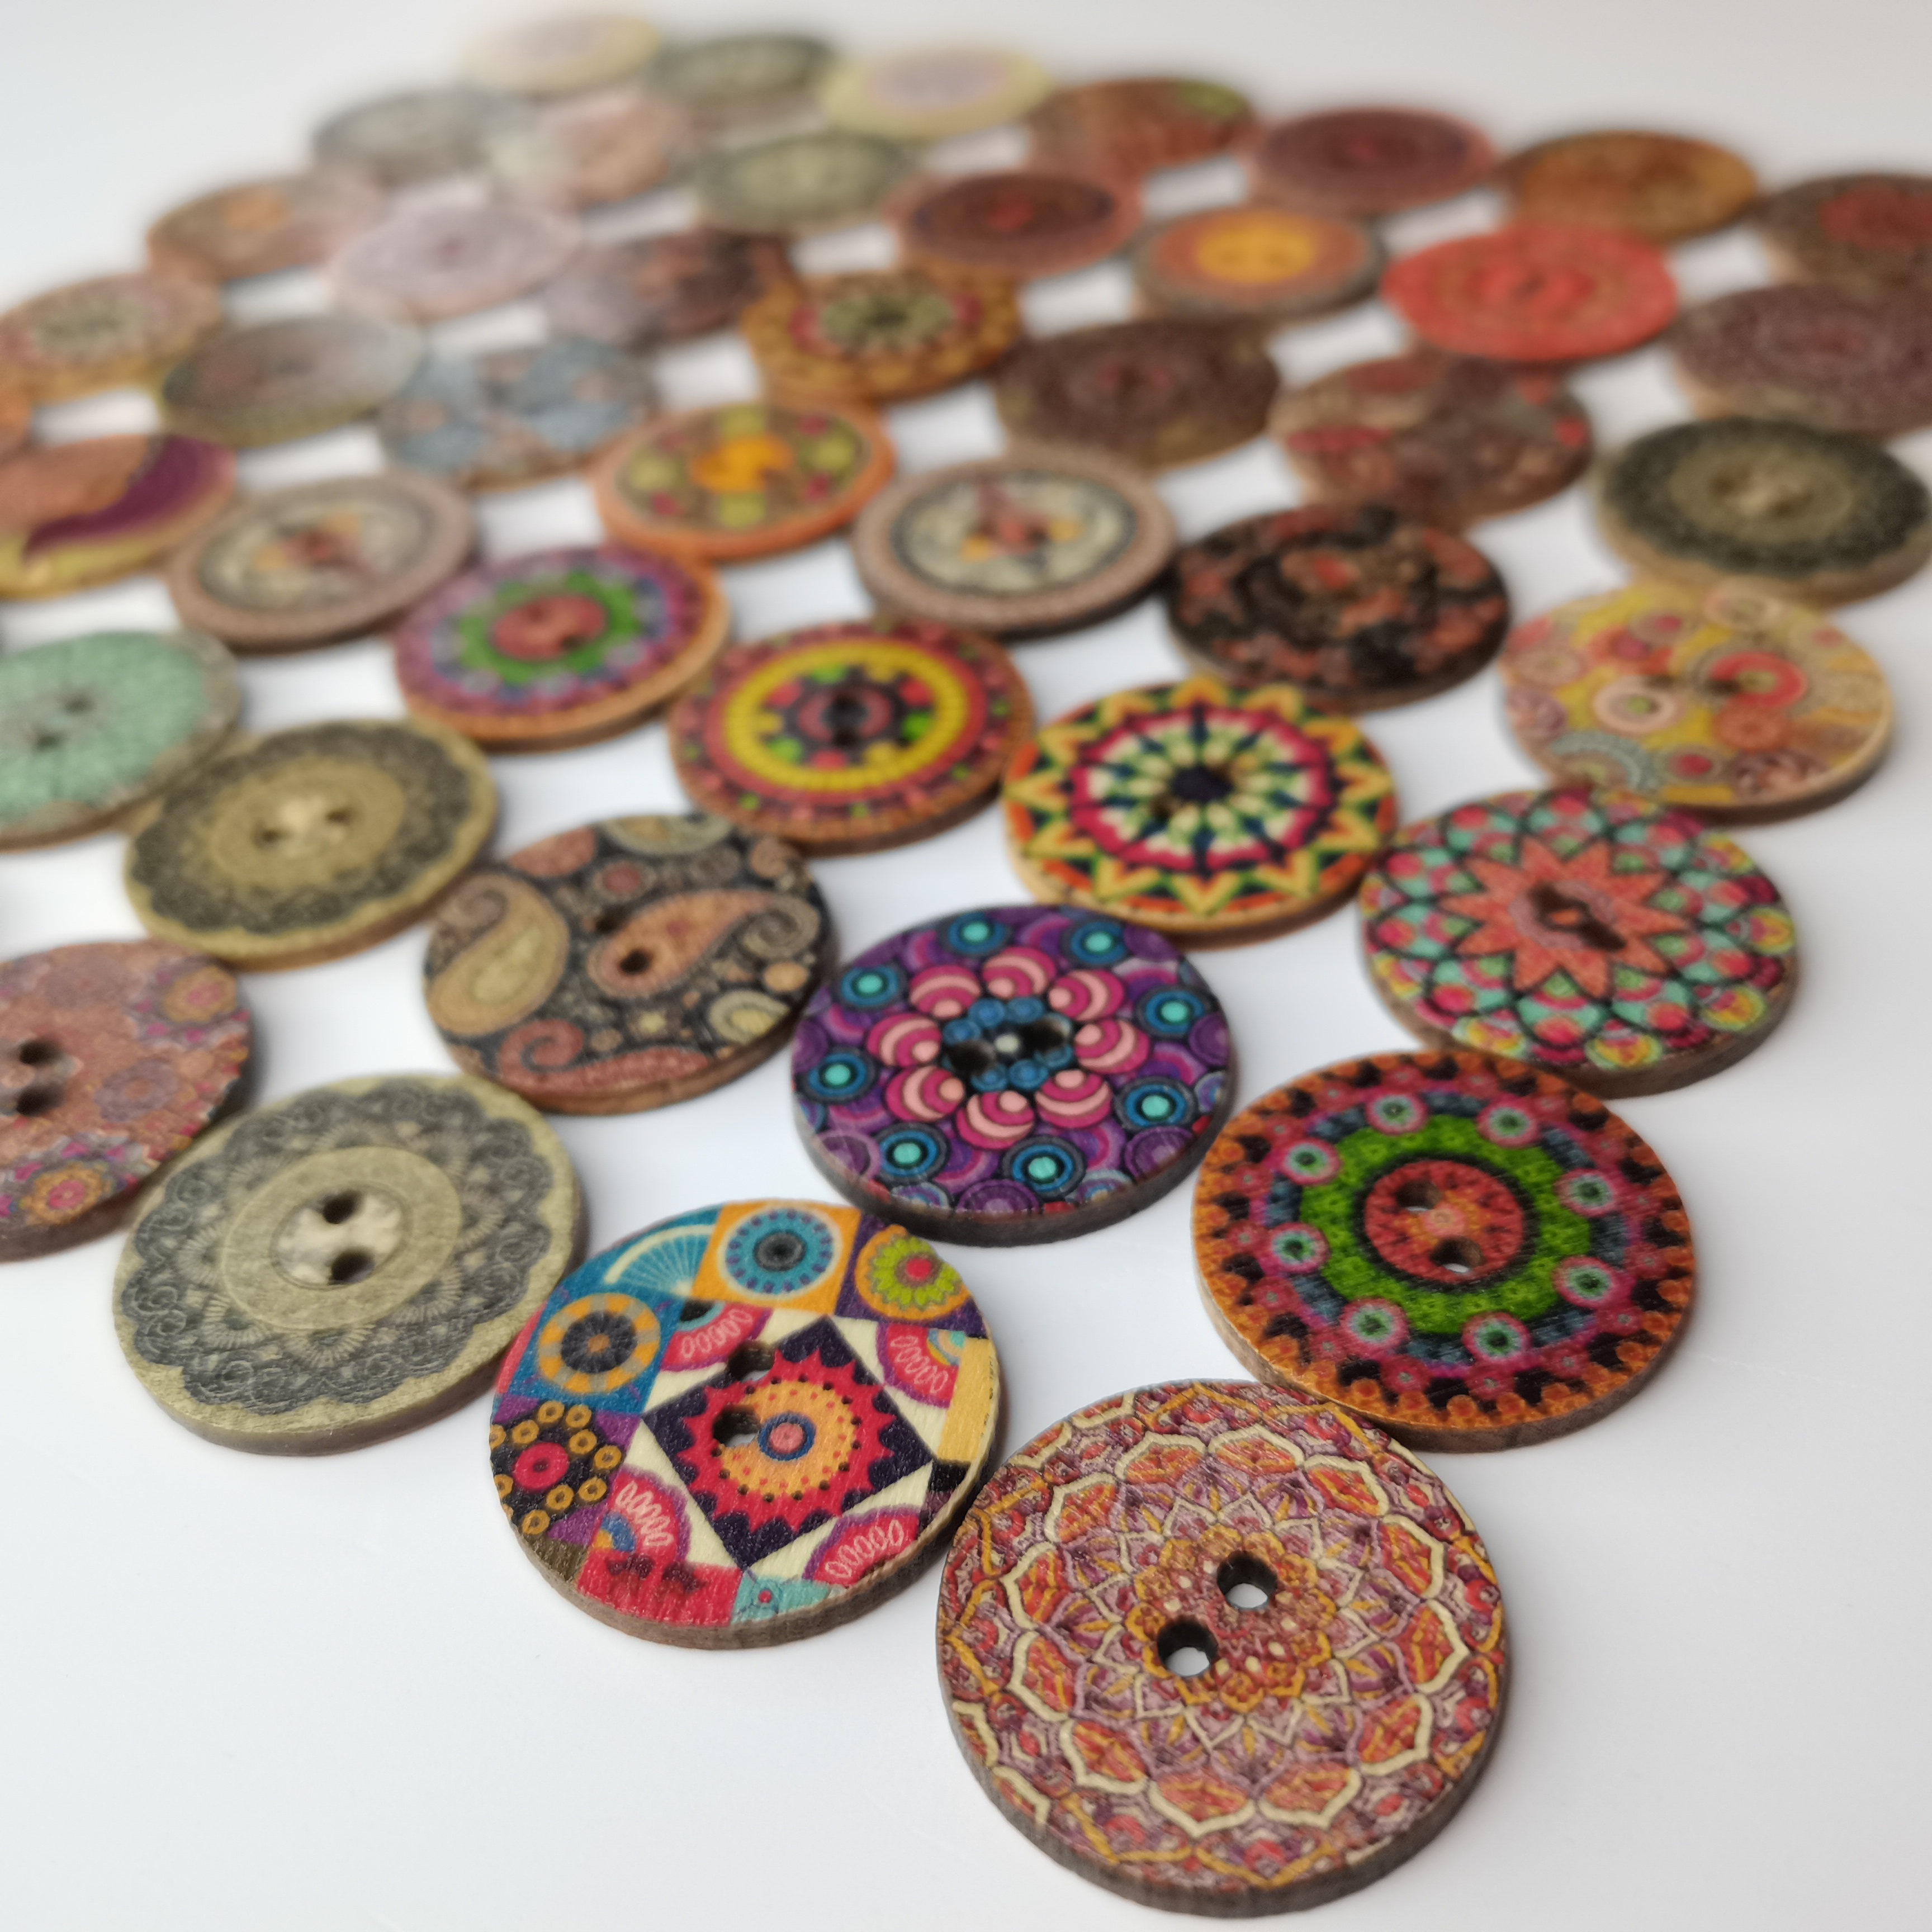 Cheap 100pcs 3/4inch Wooden Buttons Mixed Pattern Flower Shape Vintage  Decorative 2 Holes Sewing Works